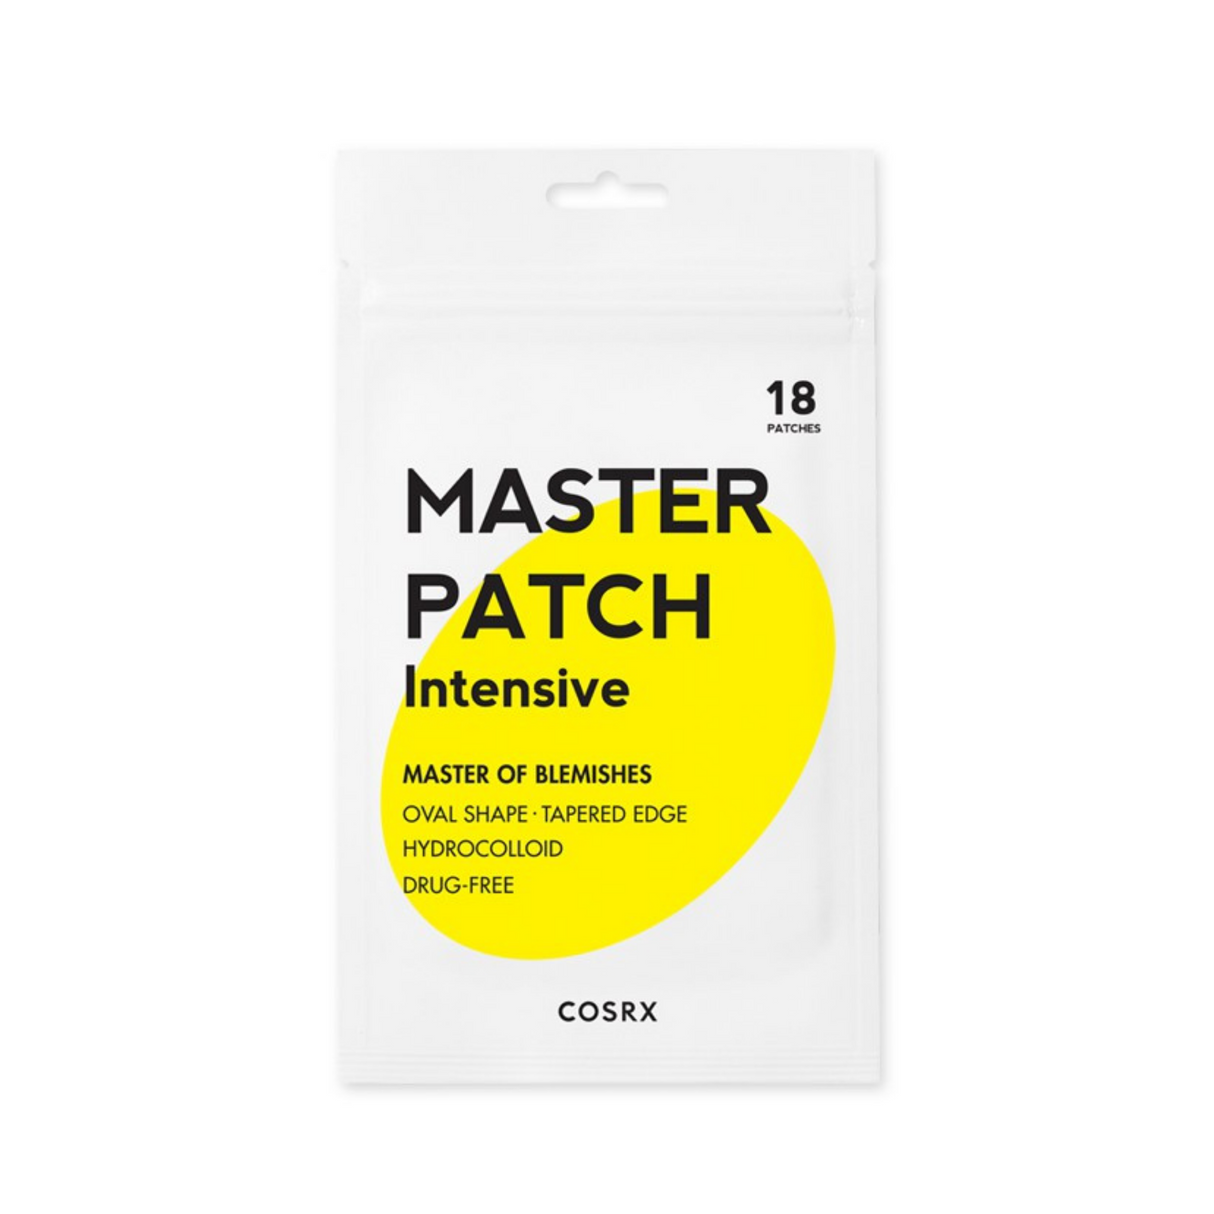 COSRX Master Patch Intensive (18 patches)